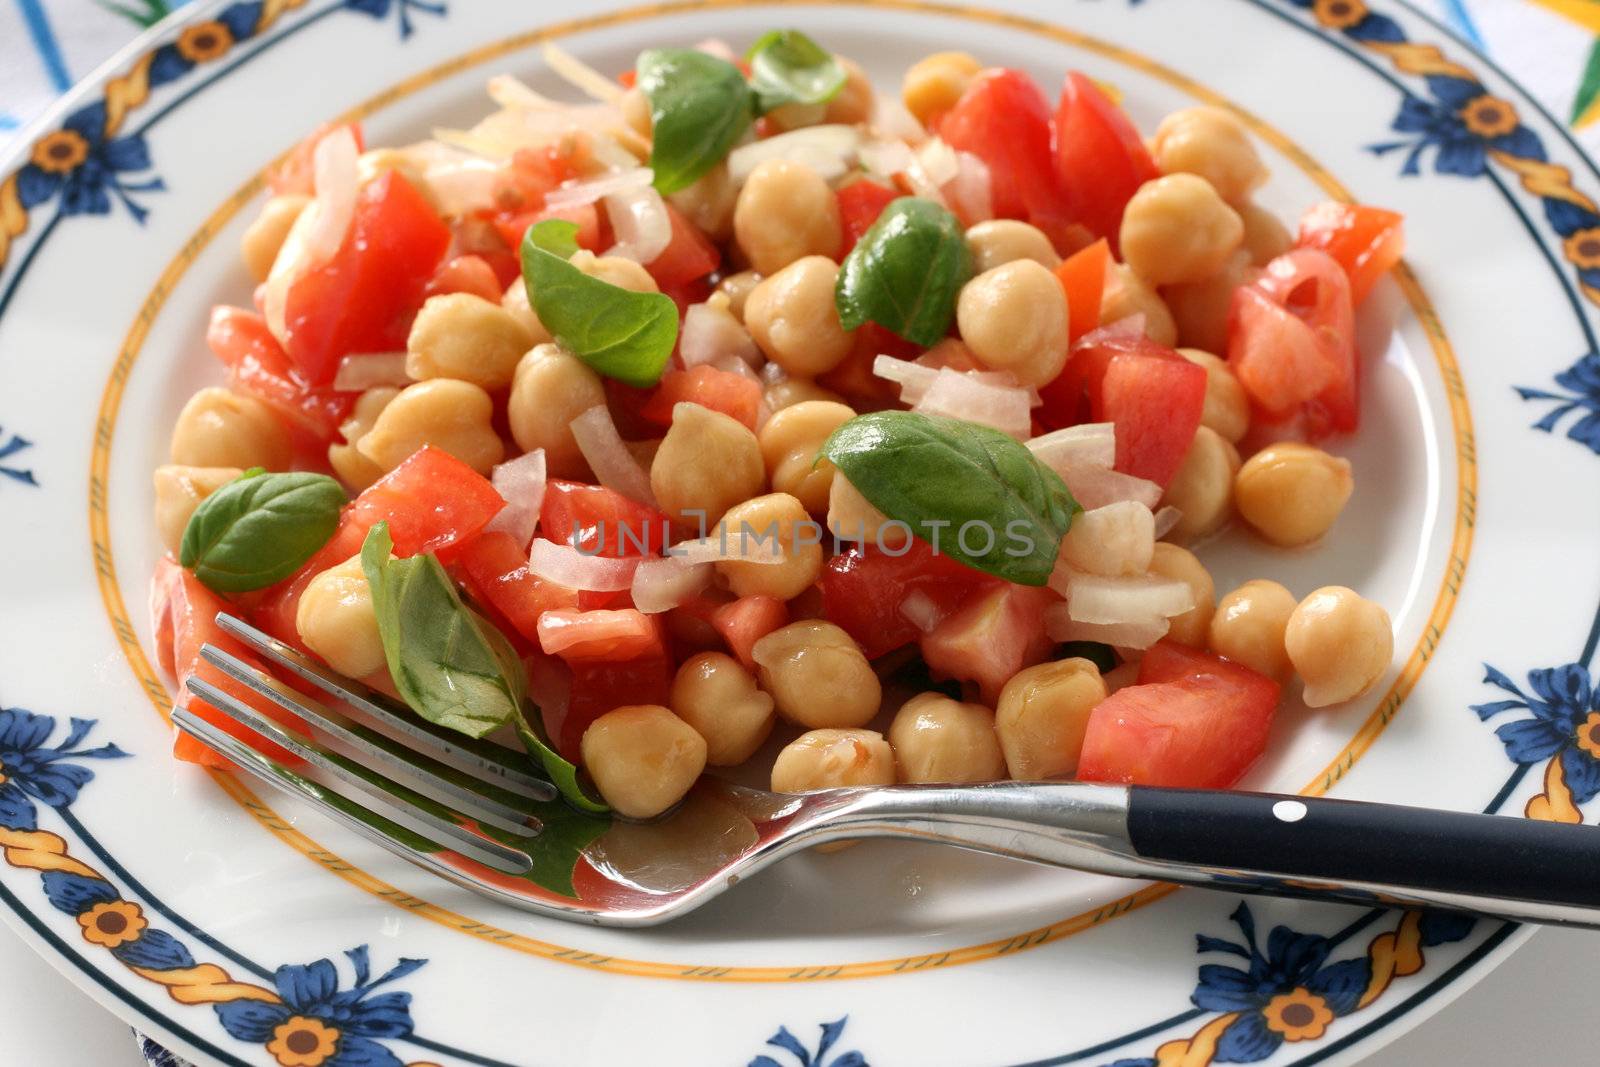 Salad with chickpea